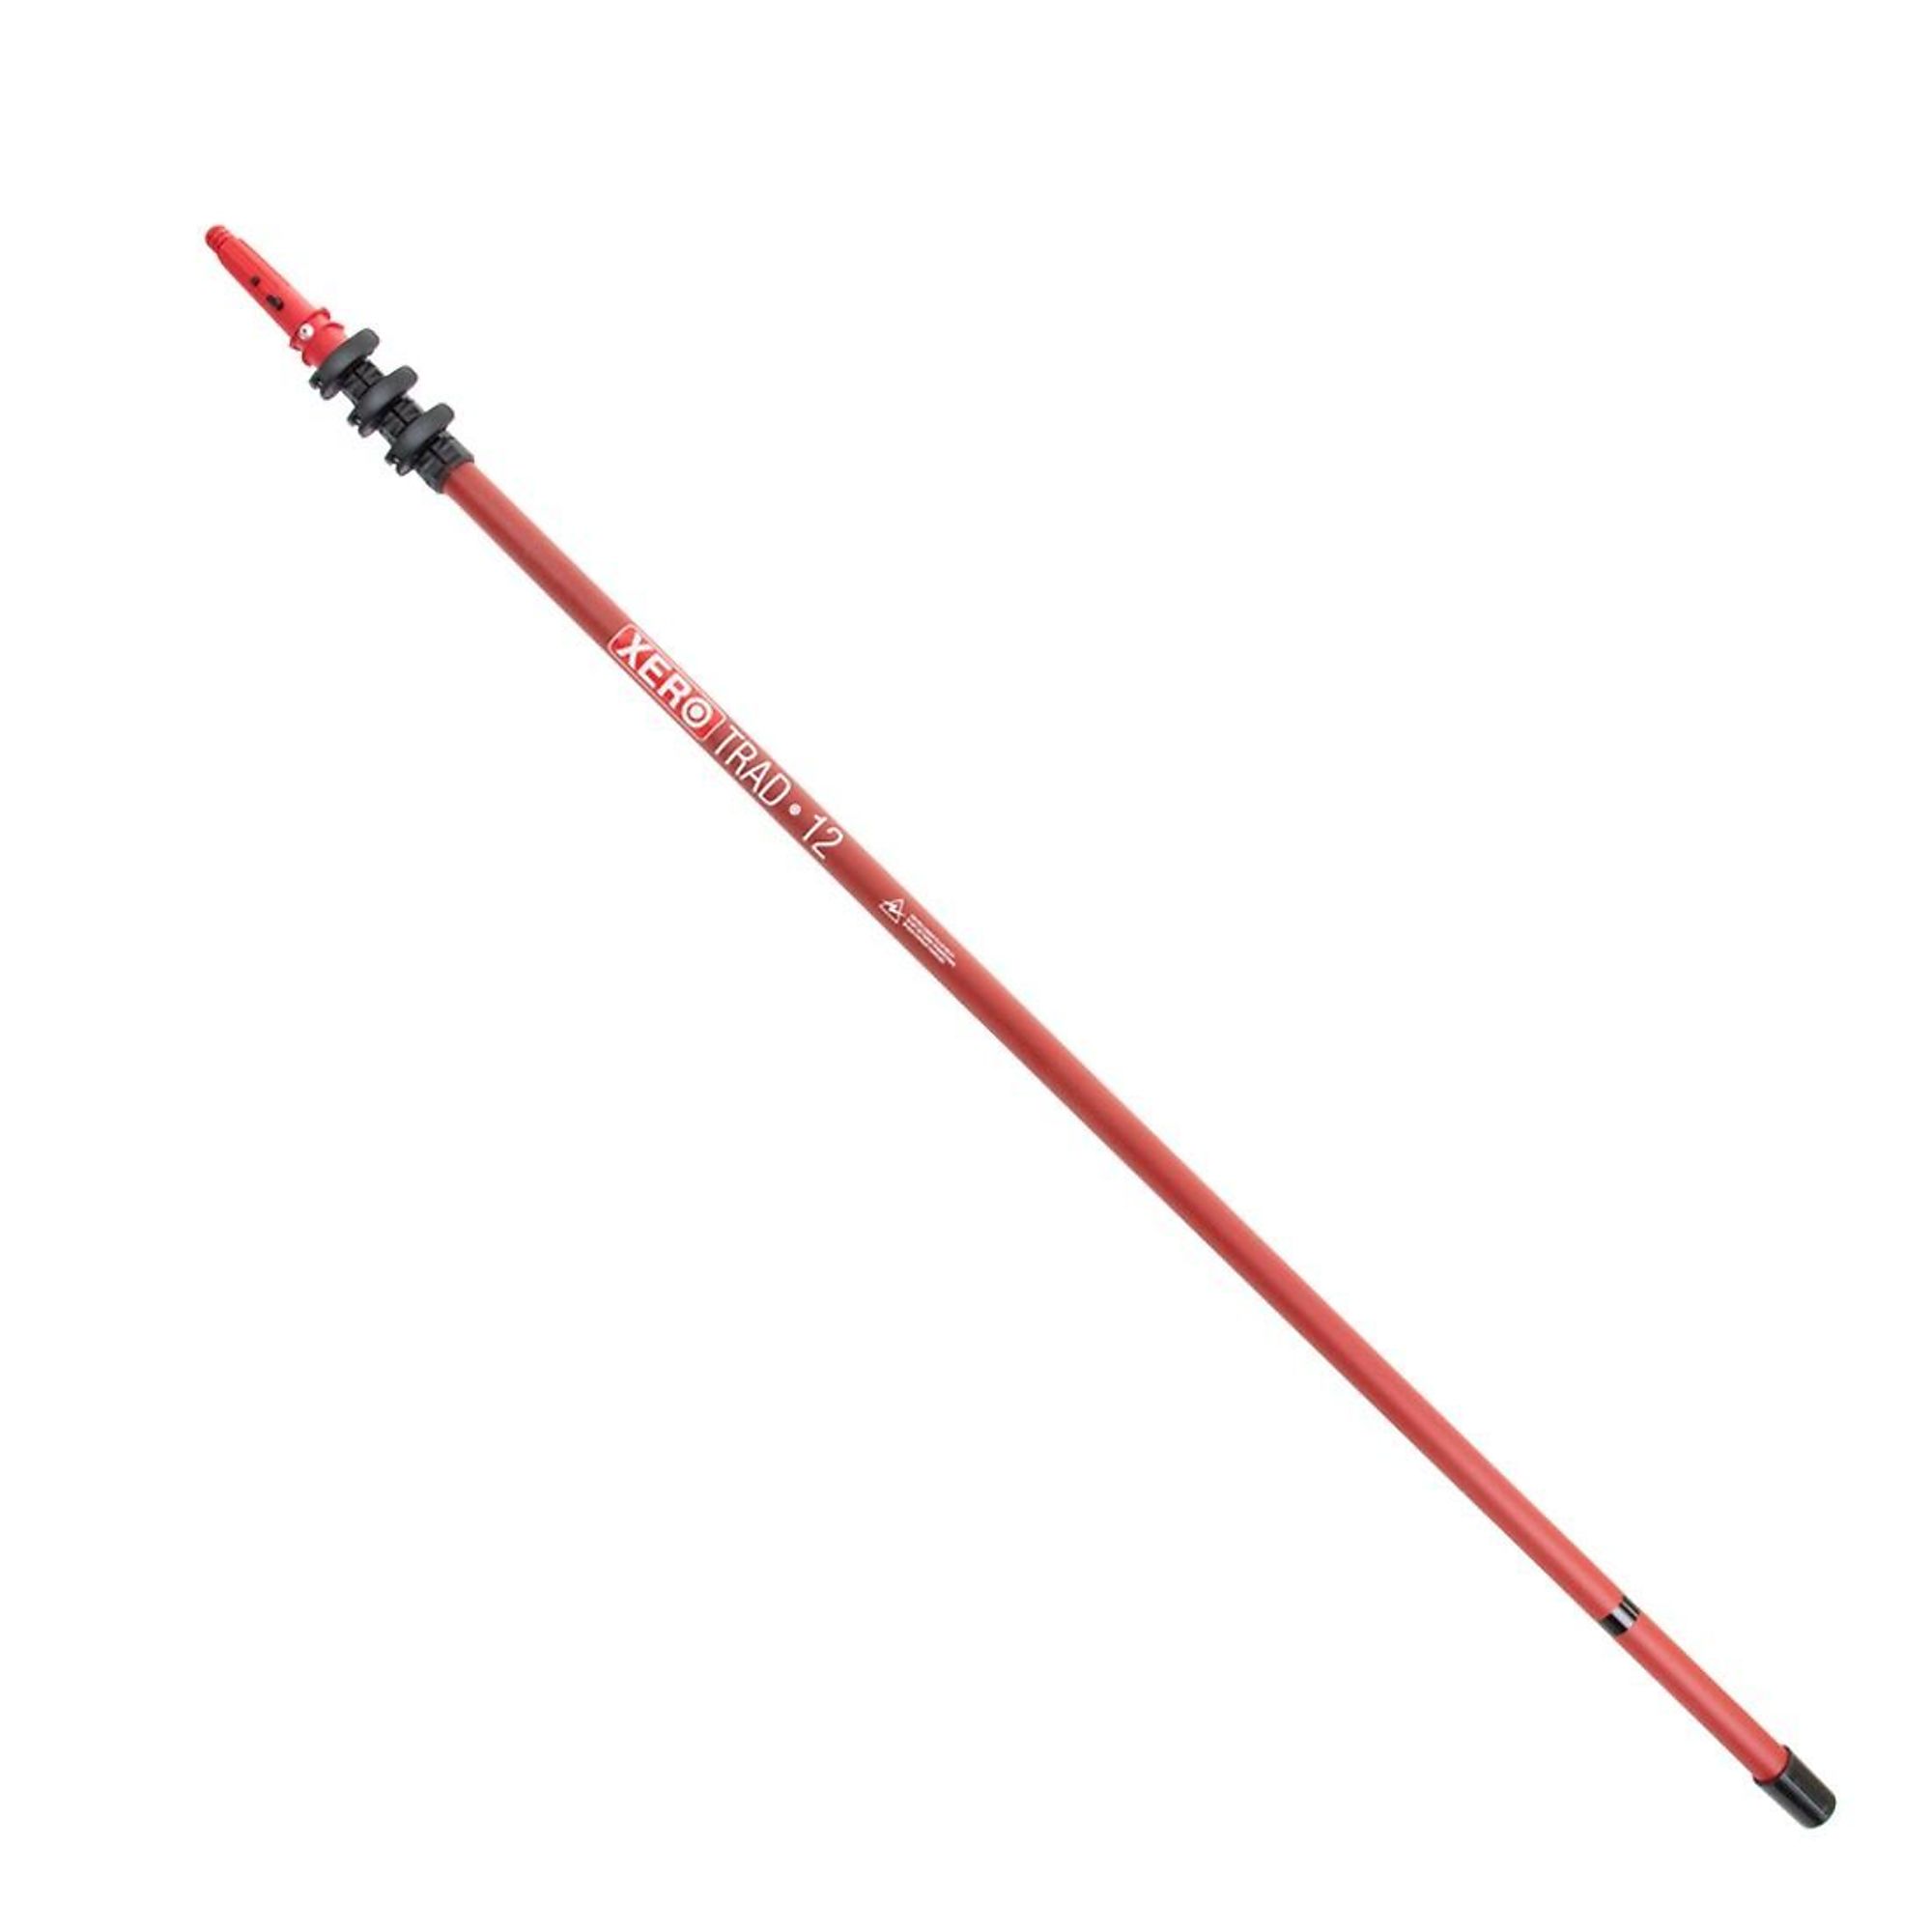 XERO, Trad Pole 2.0 Unger Pole Tip - Red 12ft., Model 209-20-358